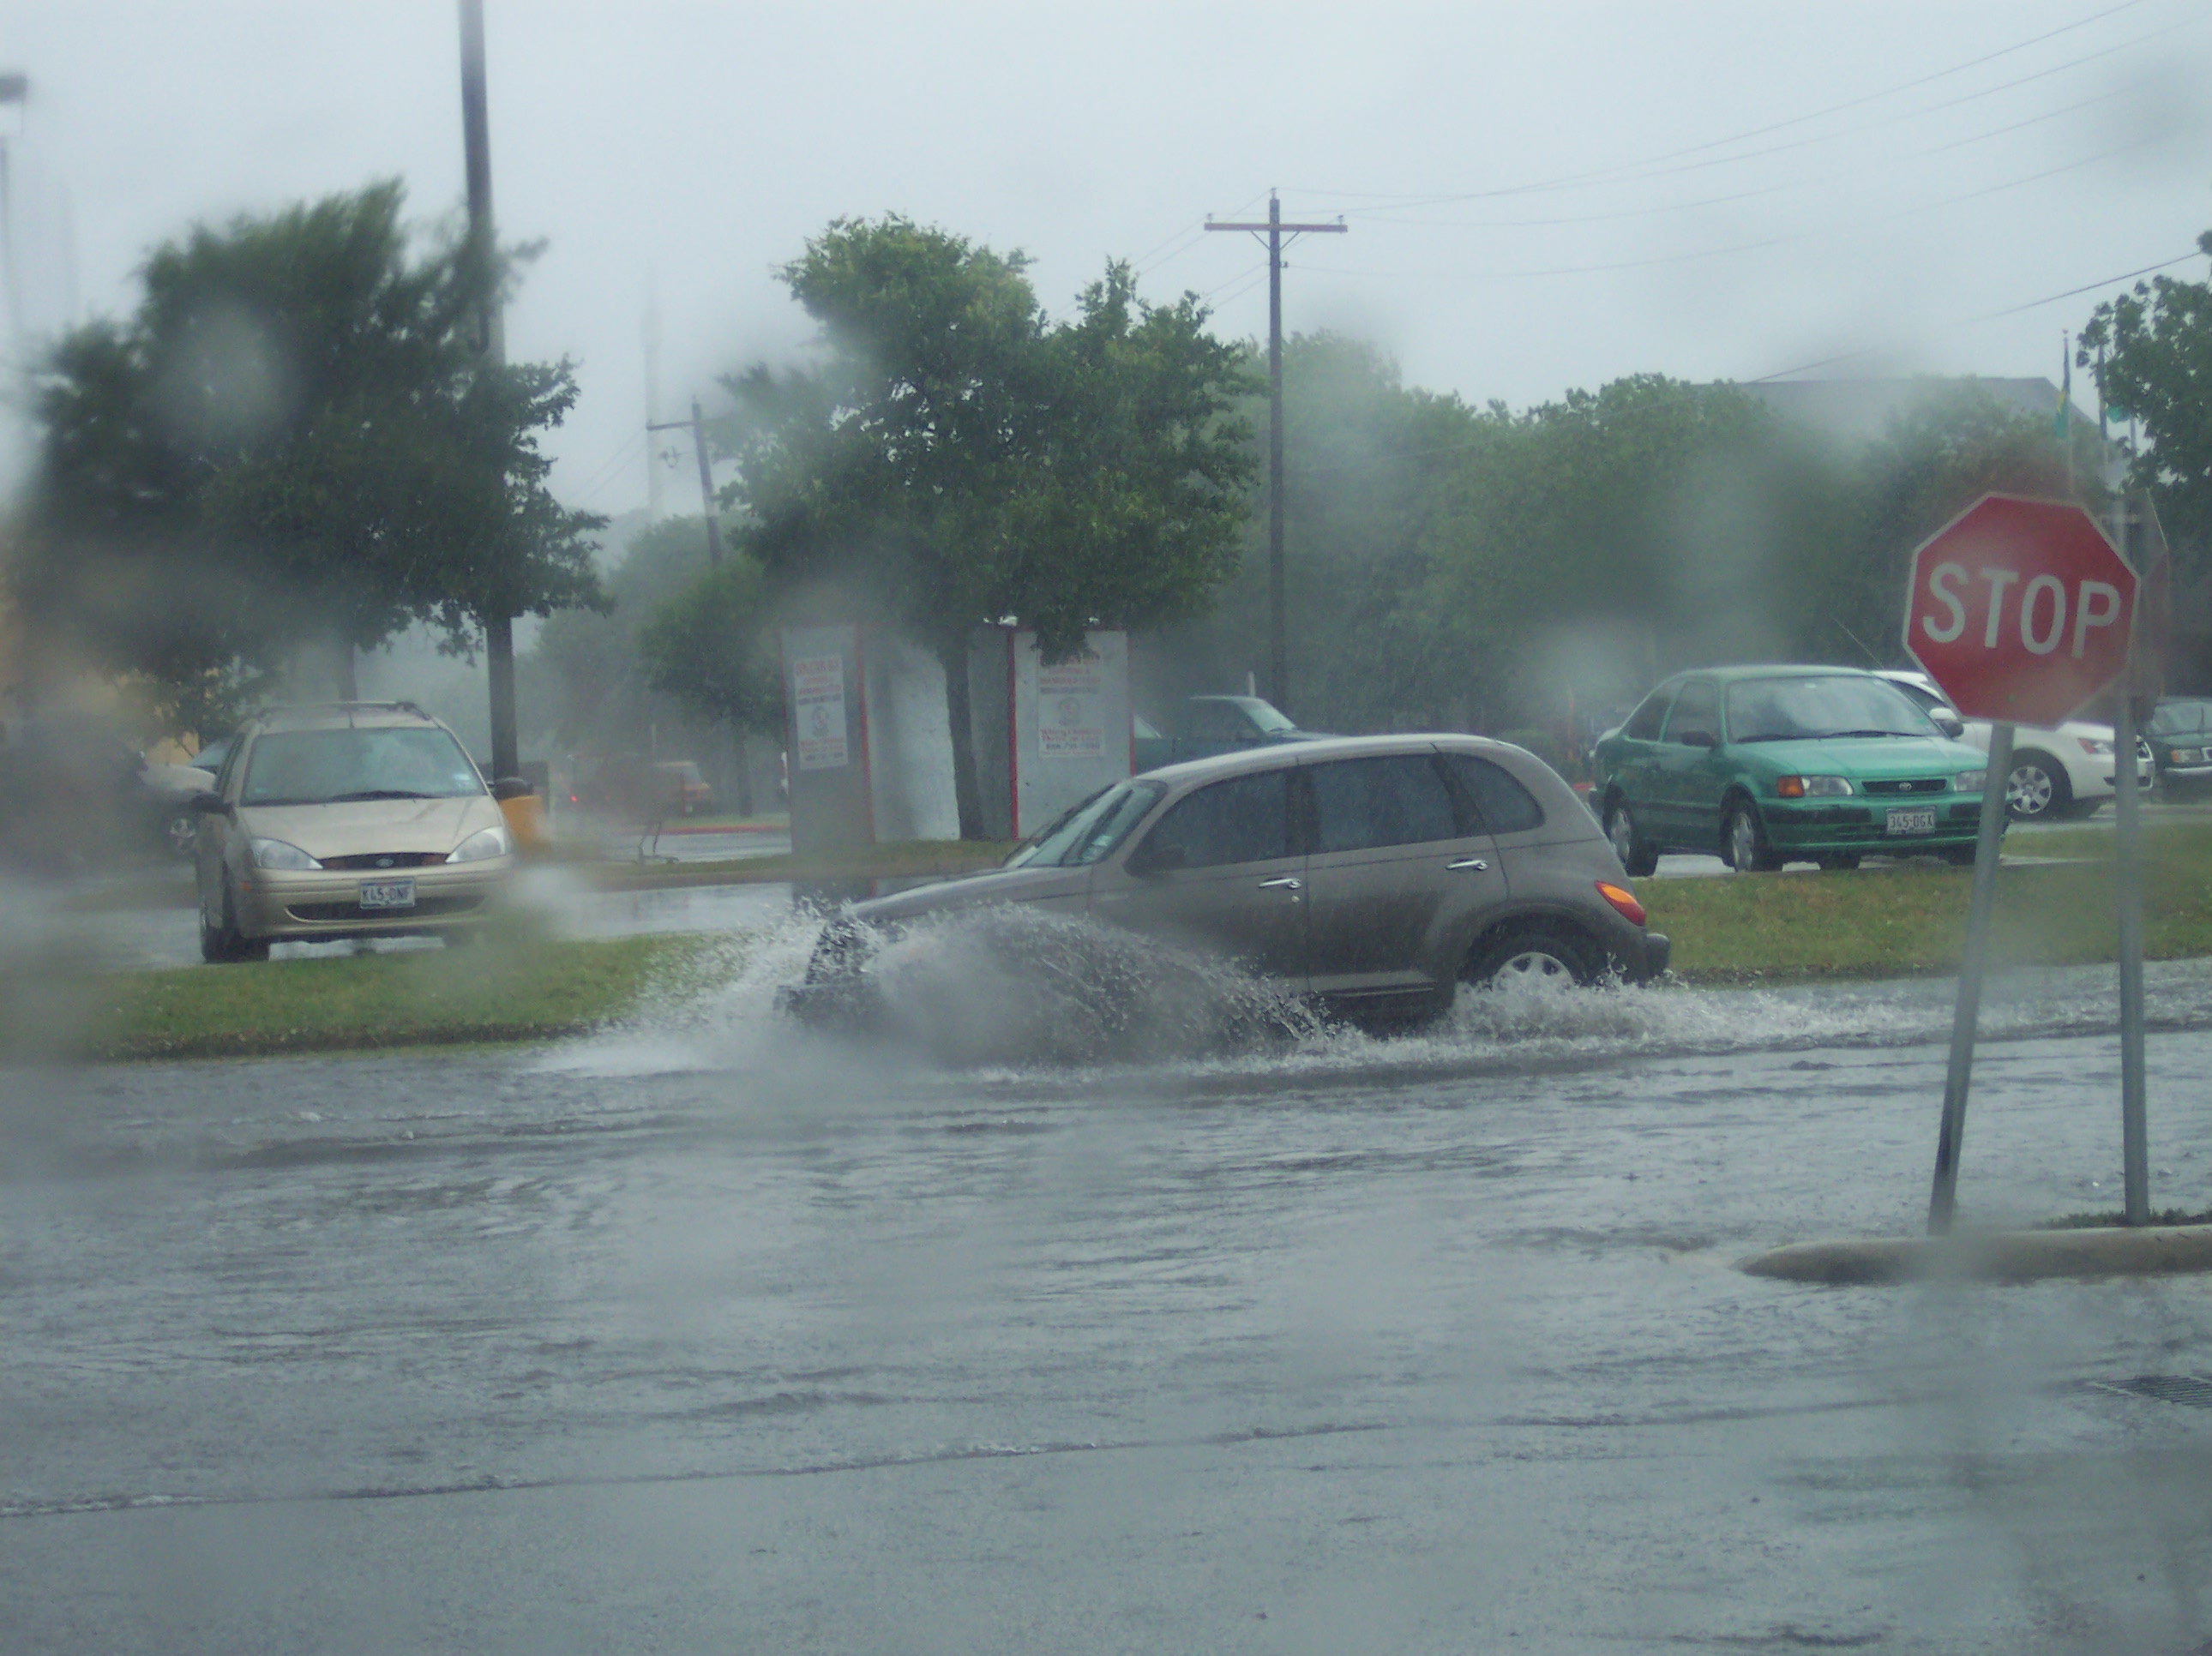 Flash_flooding_in_a_city_street